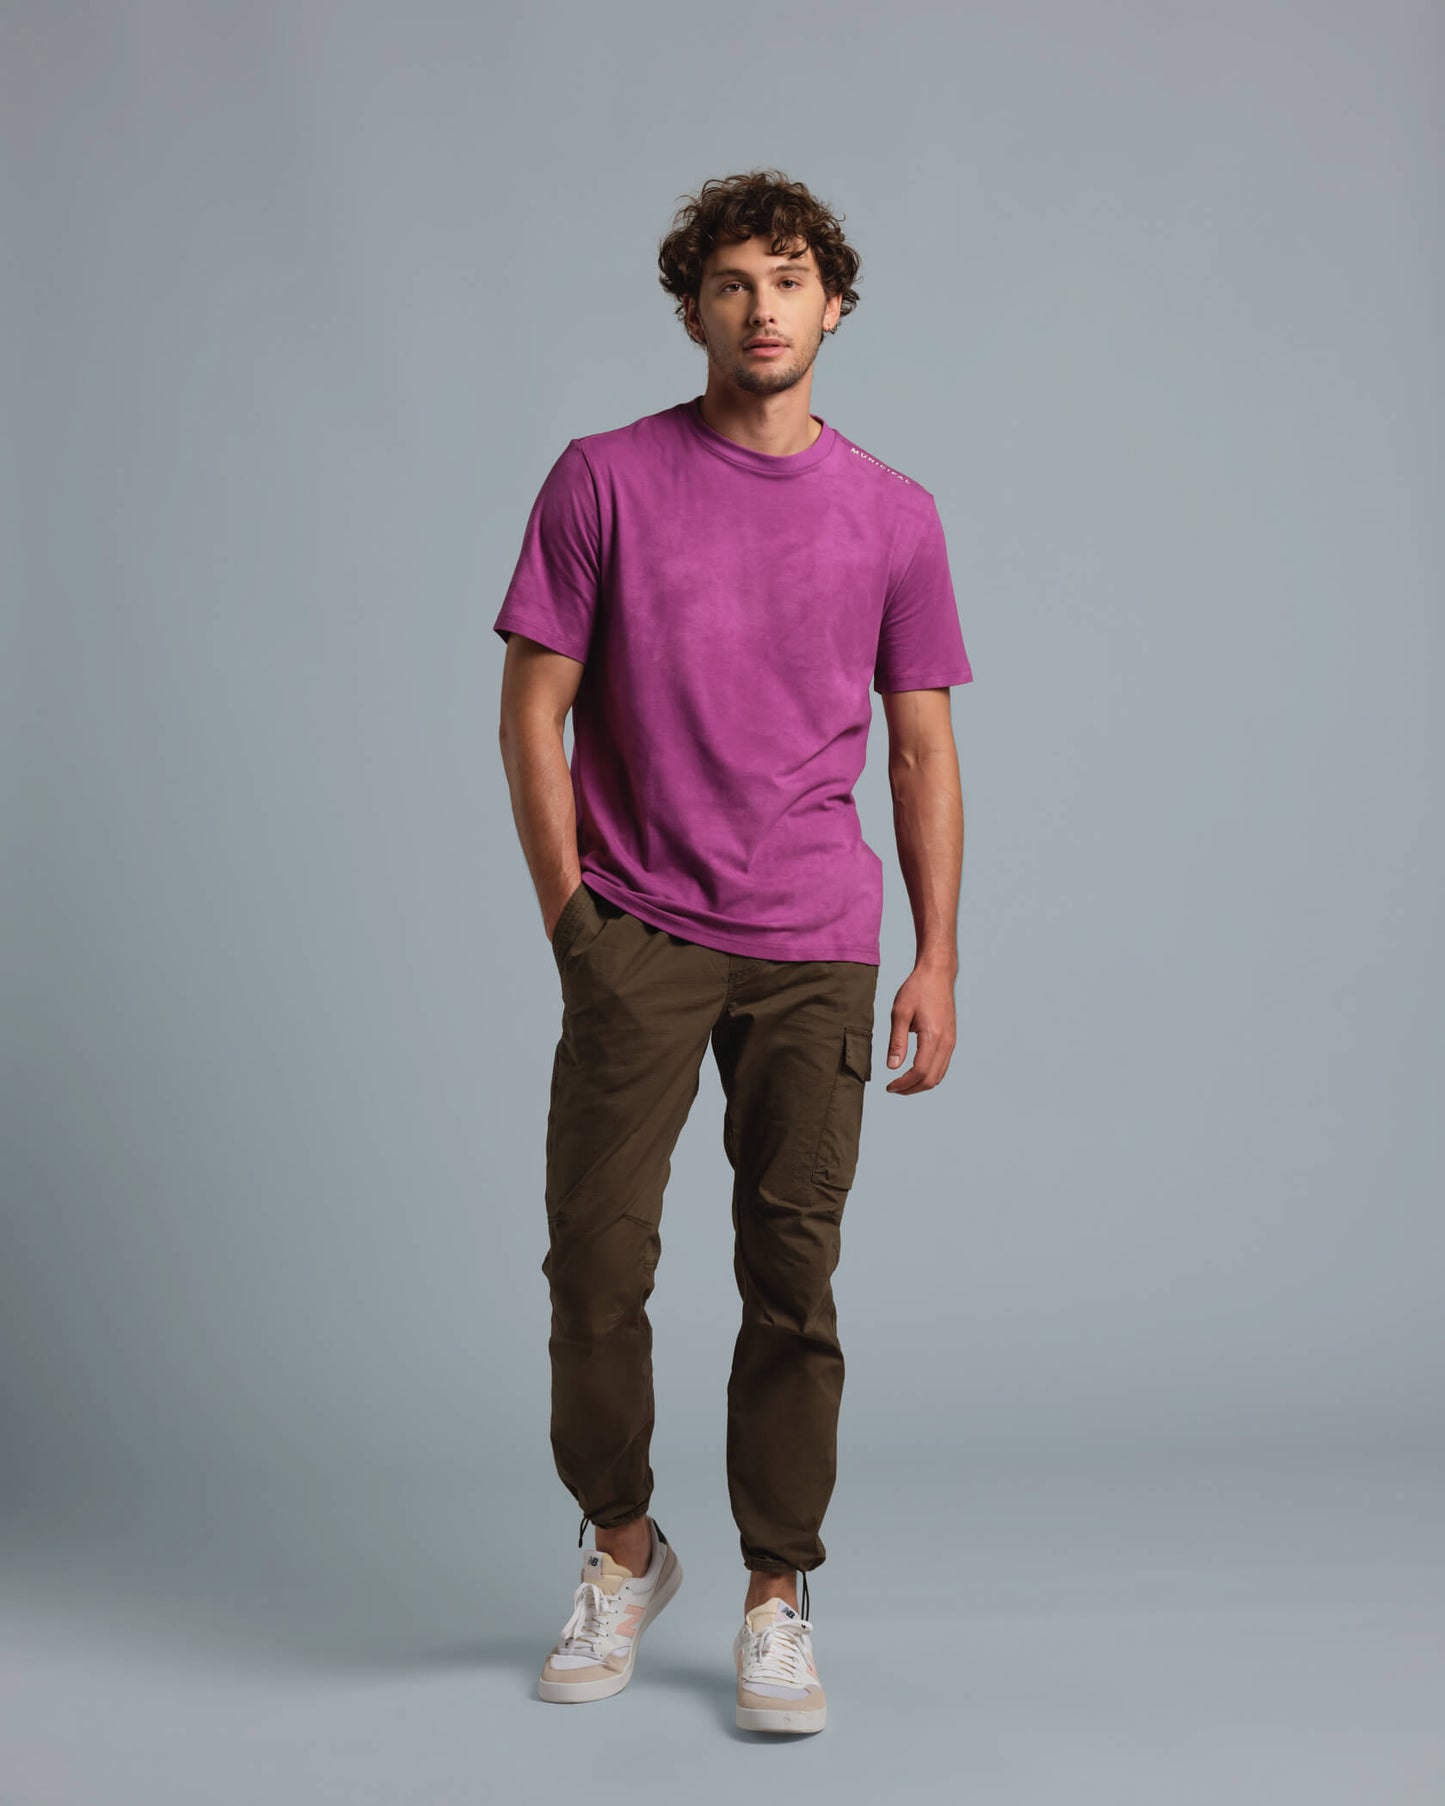 Enduro Stretch T-Shirt |Bright Berry Color Wash| outfit